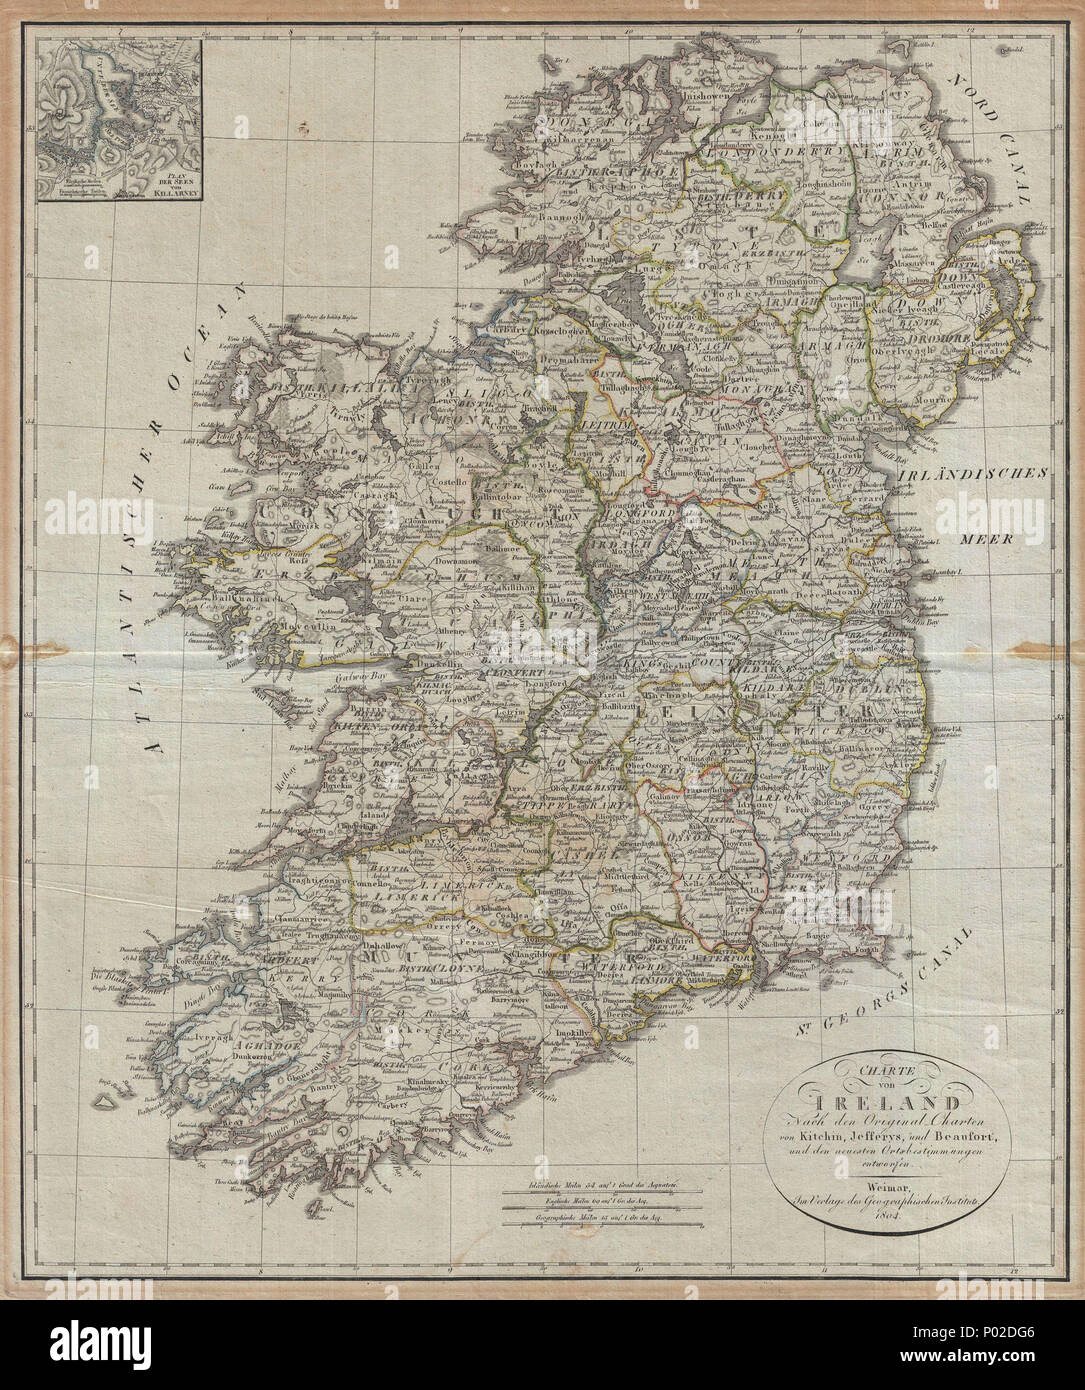 .  English: An uncommon map of Ireland dating to 1804. Though published by the German Geographical Institute, this map references the earlier work of Thomas Kitchin, Thomas Jefferys, and Daniel Beaufort. Covers the entirety of Ireland with exceptional detail throughout. Color coded in outline form at the county level. An inset of Killarney appears in the upper left quadrant. Text in English and German.  . Charte von Ireland Nach den Original-Charten von Kitchin, Jefferys, und Beaufort, und den neuesten Ortsbestimmungen entworfen. 1804 (dated) 19 1804 Jeffreys and Kitchin Map of Ireland - Geogr Stock Photo